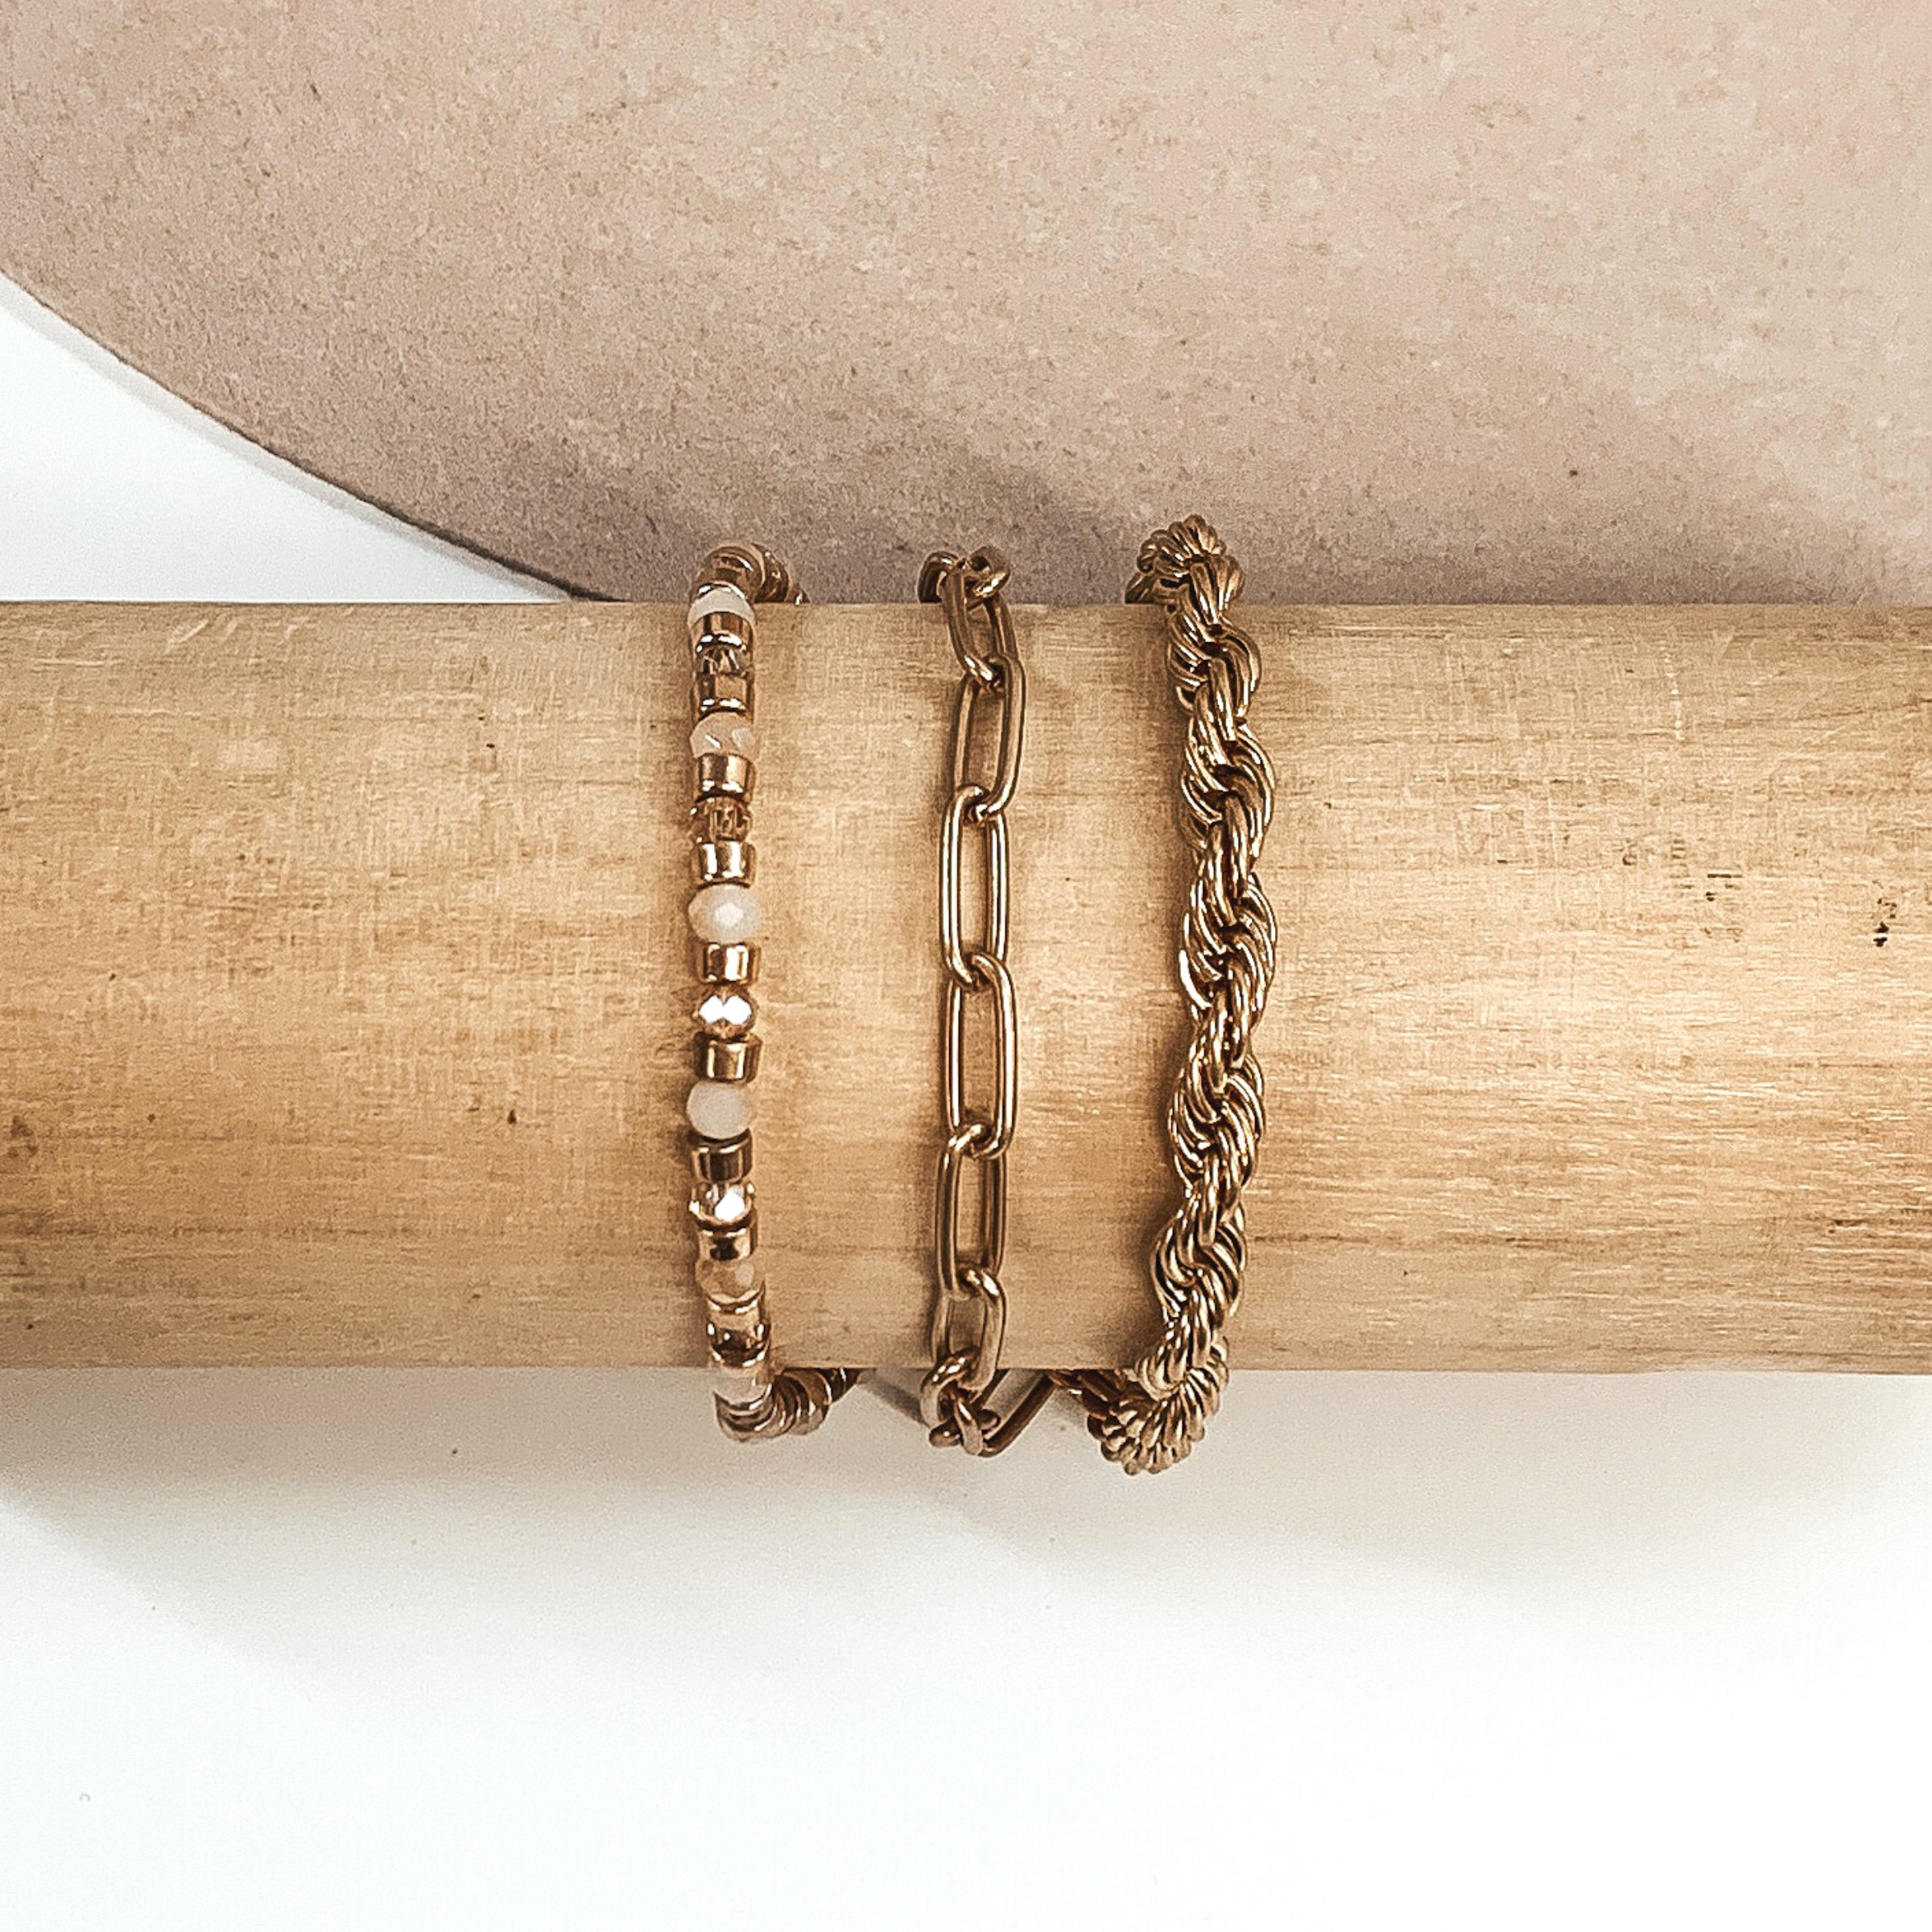 This is a gold multi stranded bracelet. This bracelet includes a rope chain, paperclip chain, and a beaded strand. The beaded strand has gold beads, champagne beads, and ivory beads. This bracelet is pictured on a wooden bracelet holder on a white and beige background. 